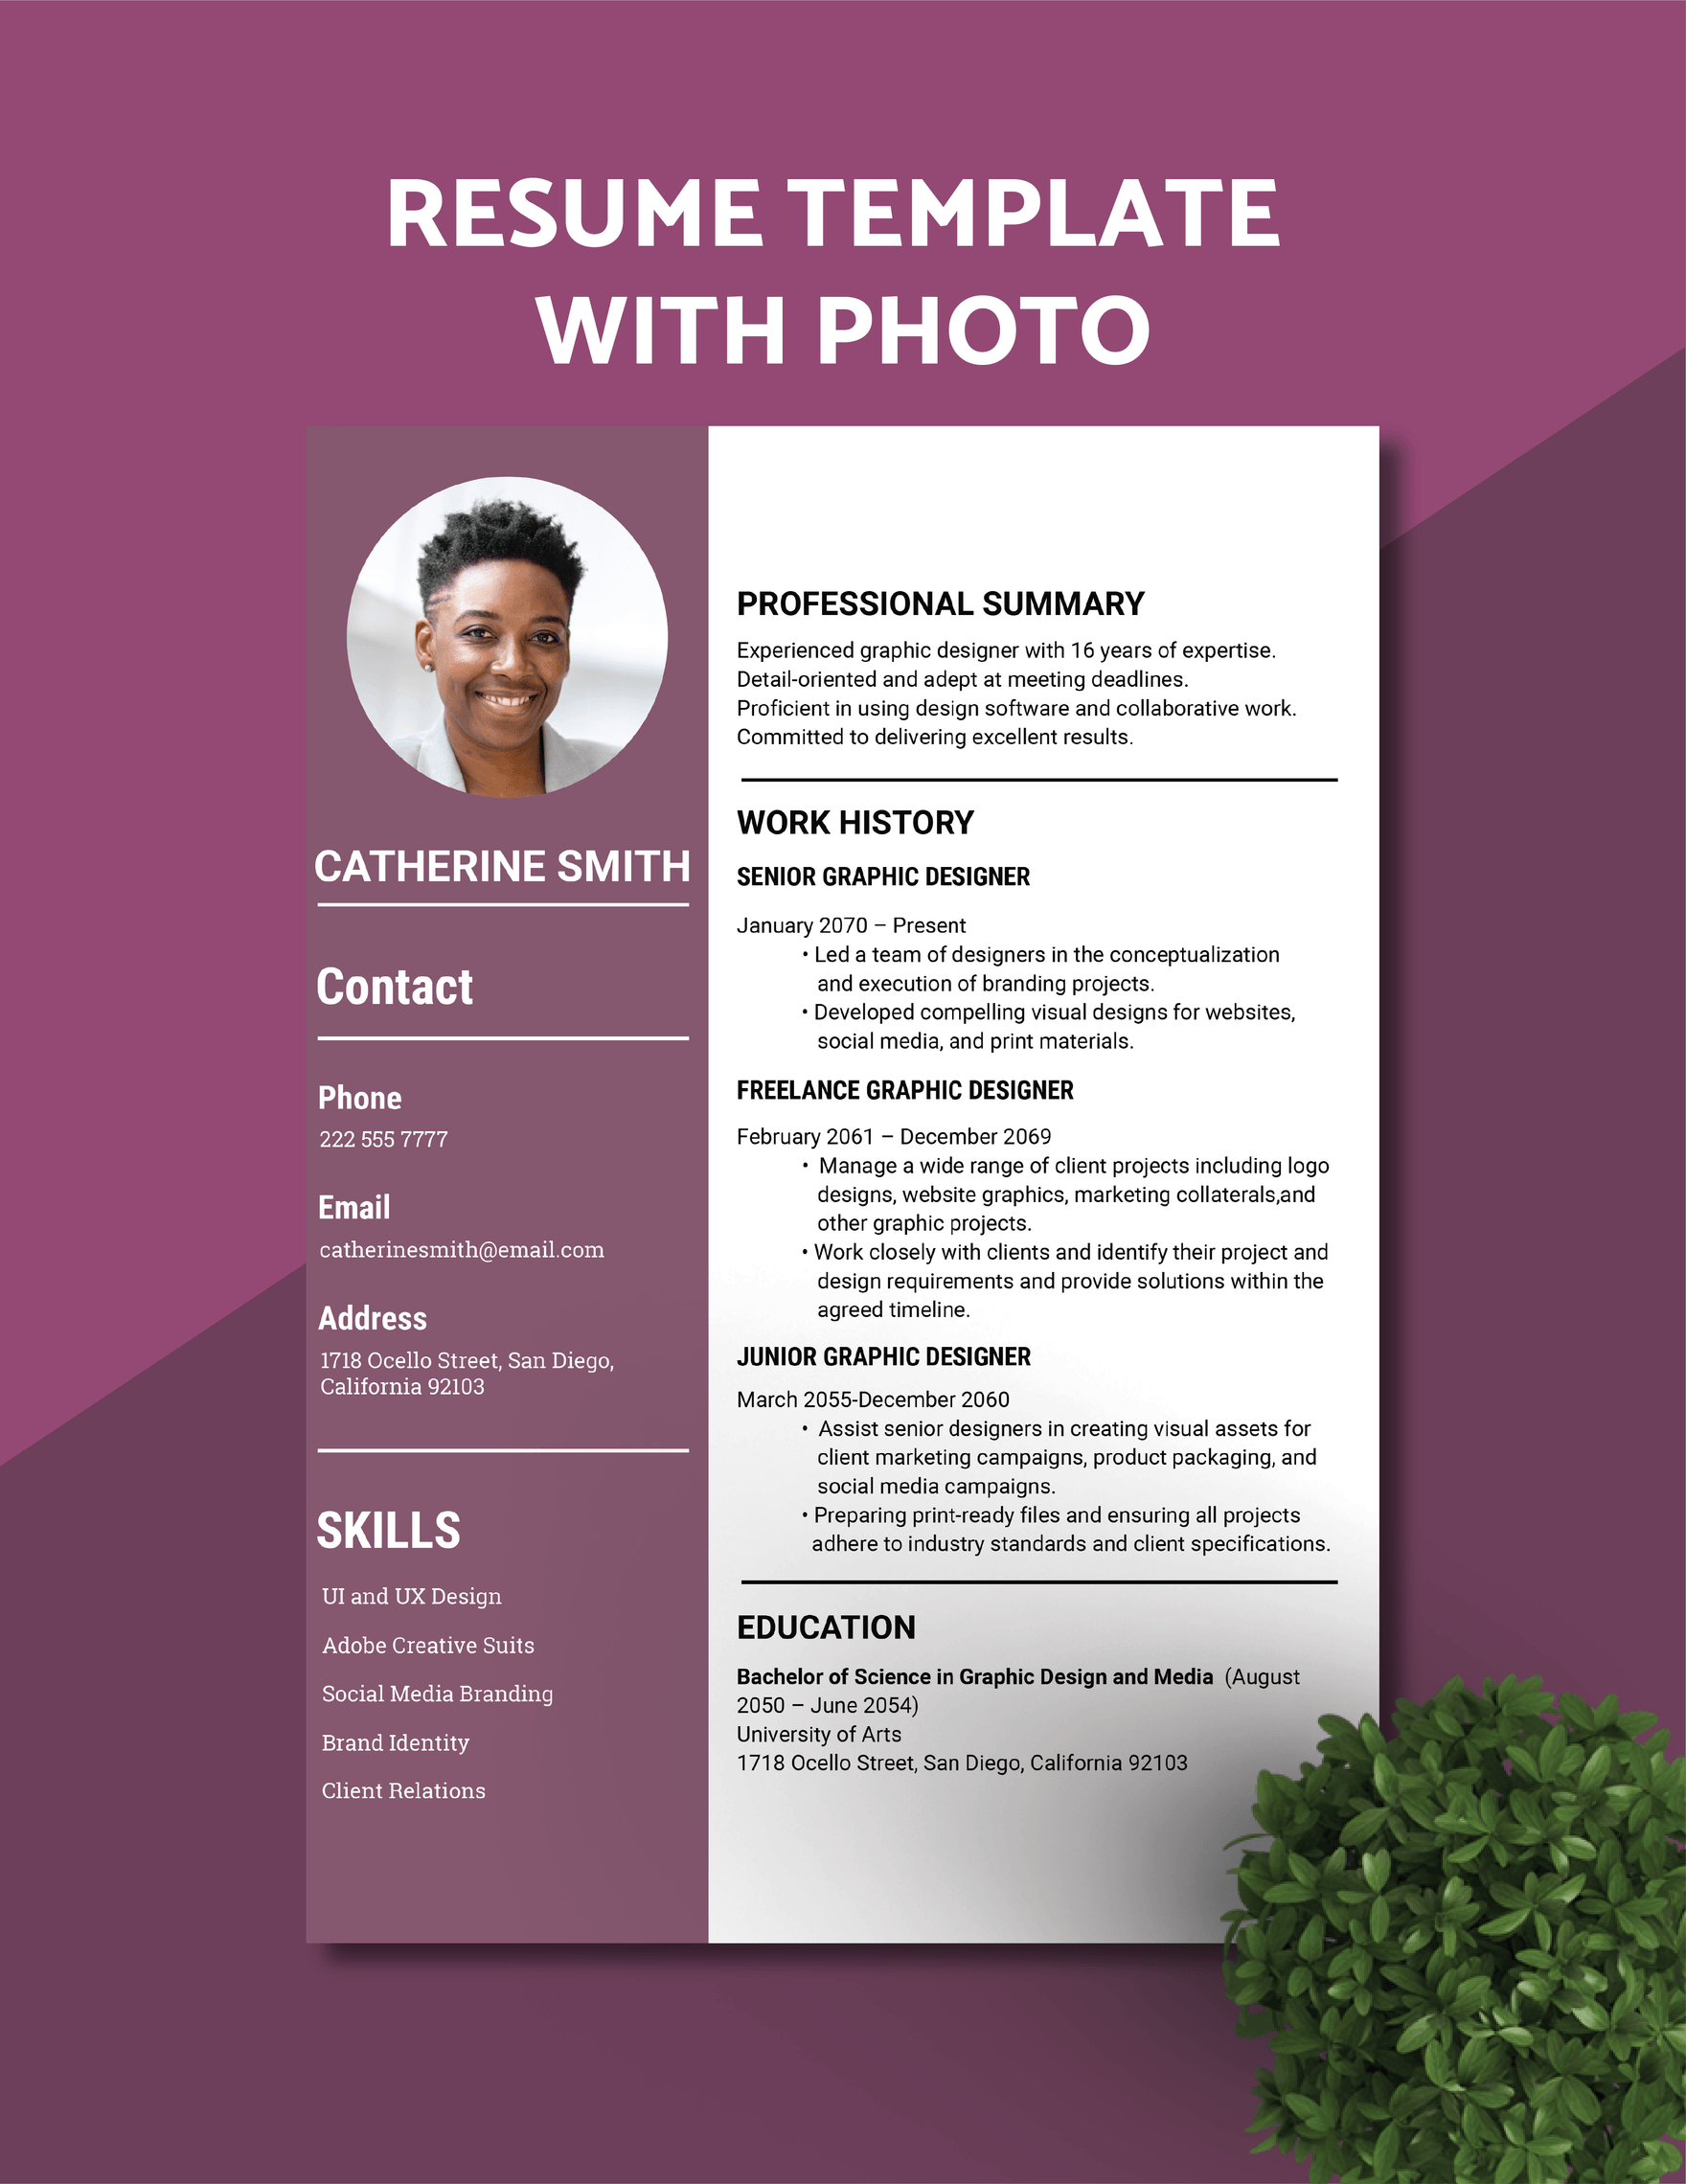 Free Resume Template with Photo